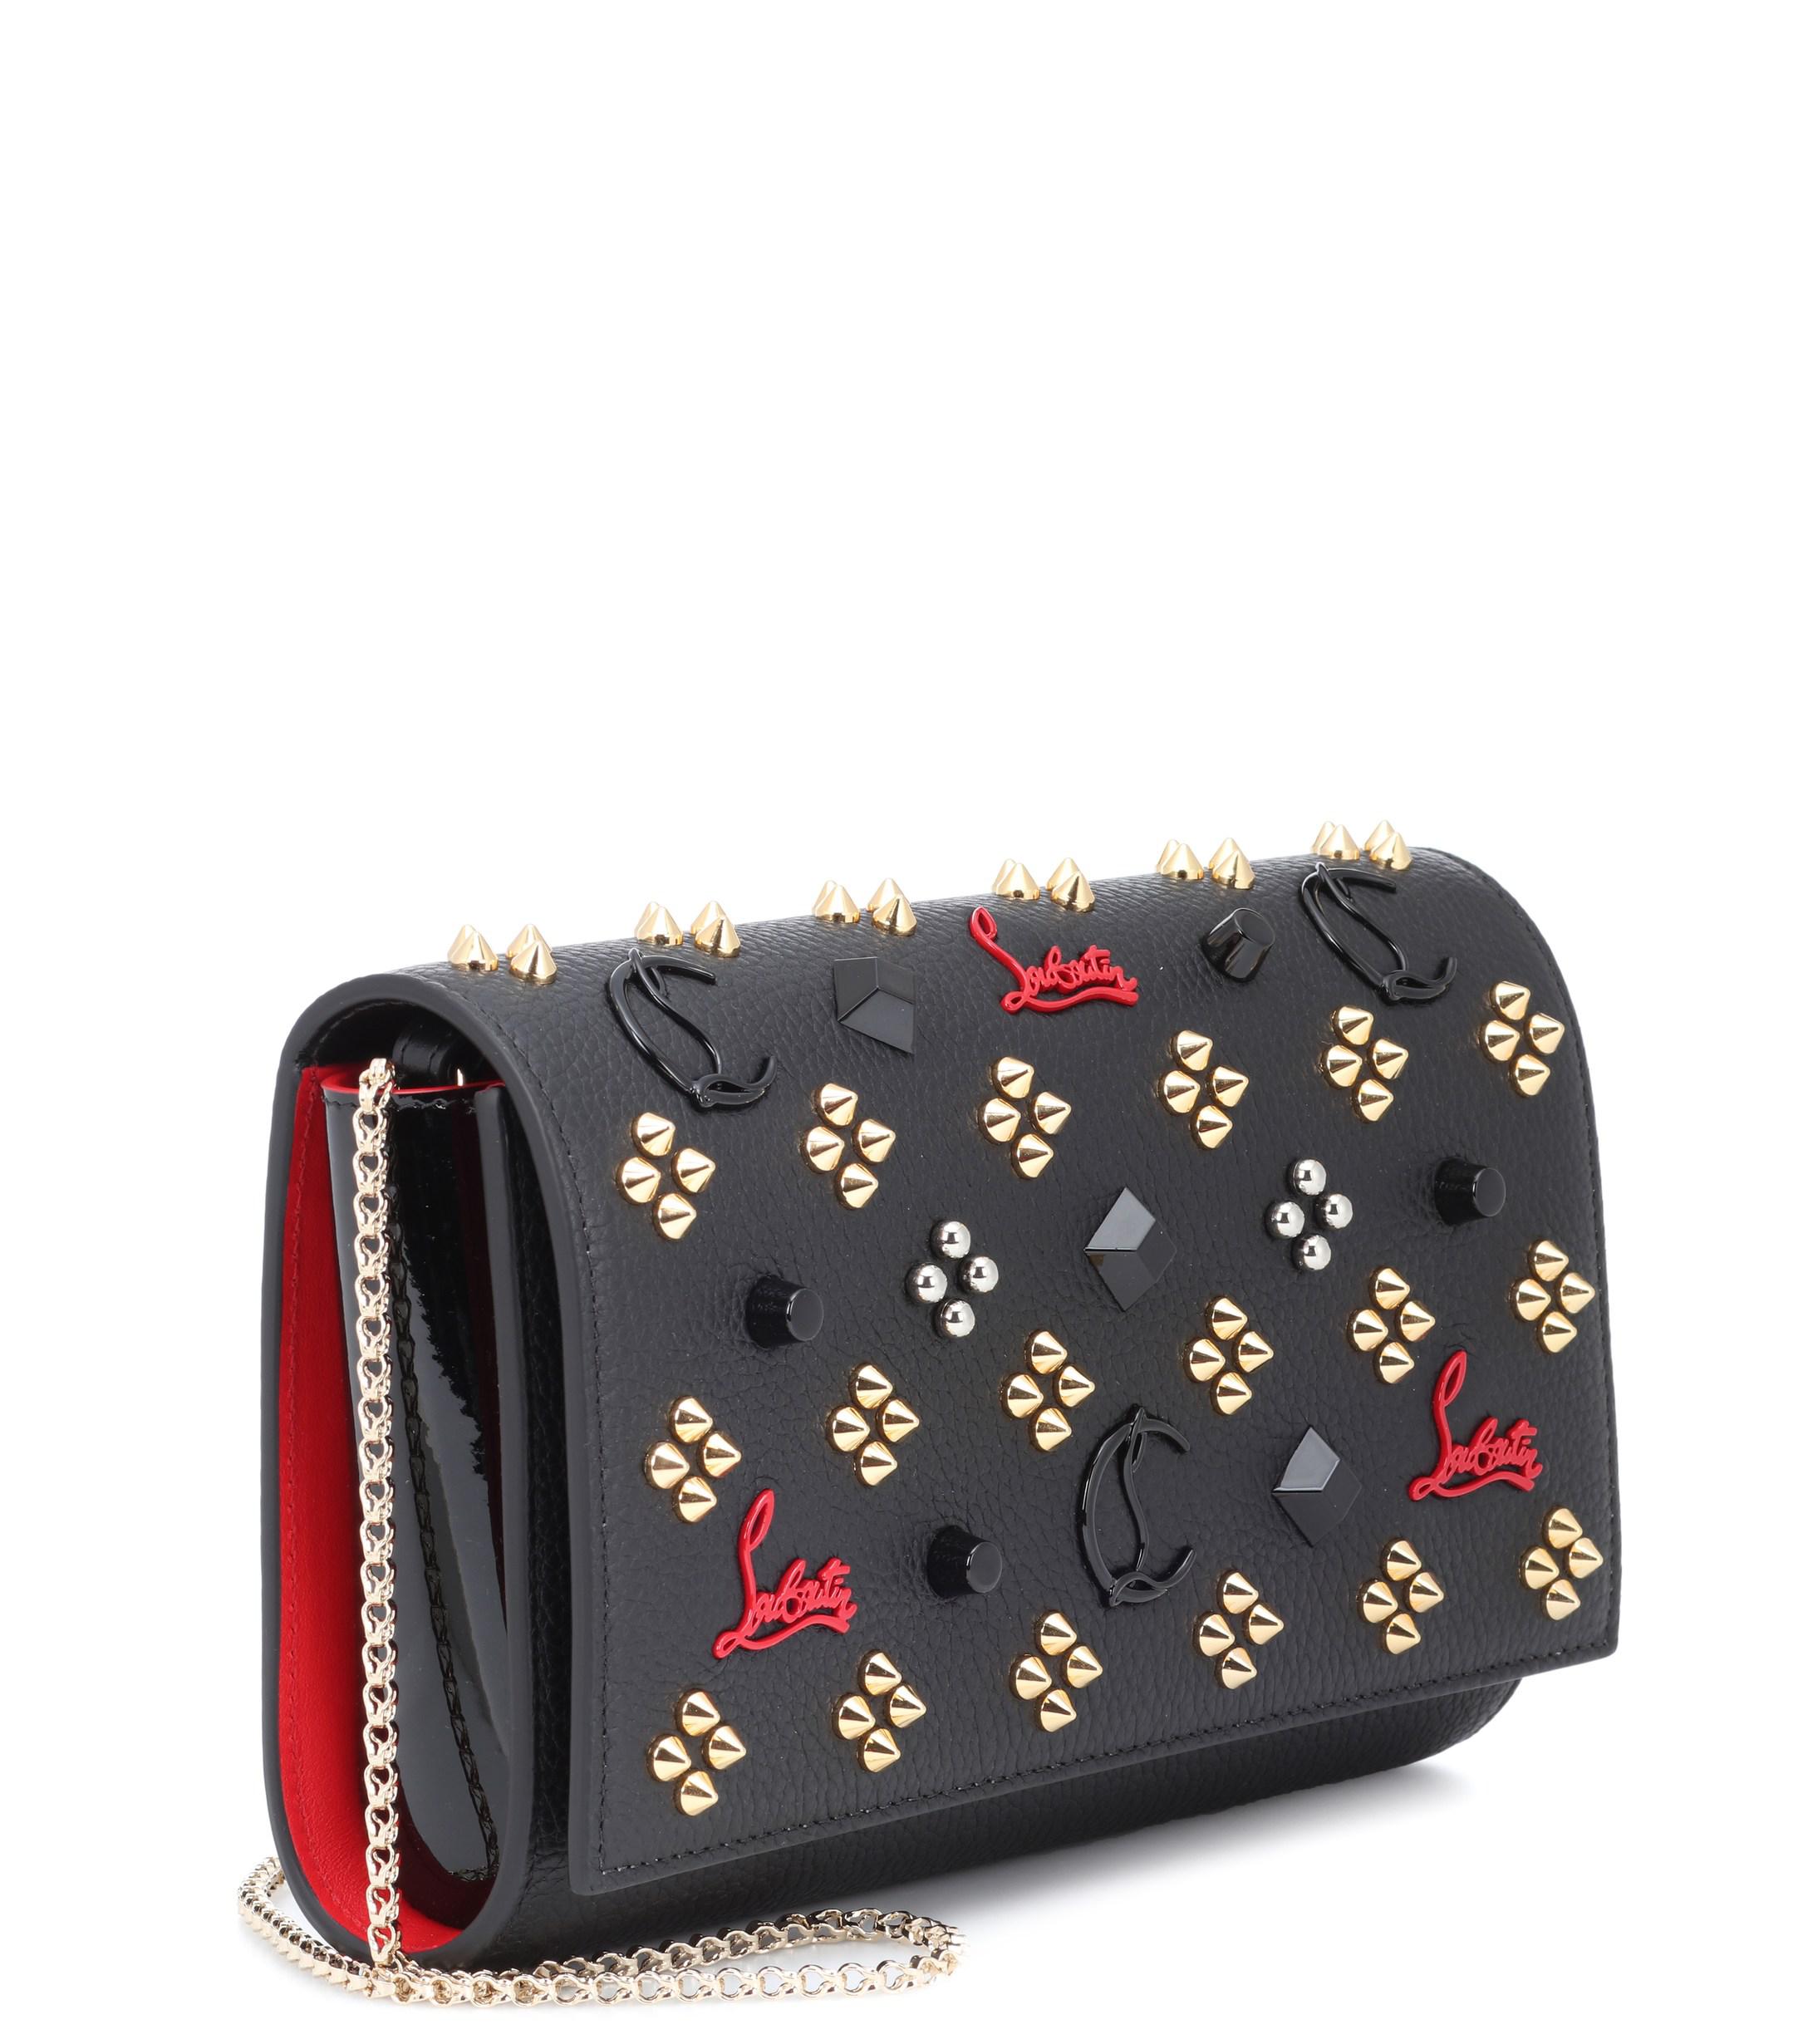 Christian Louboutin Paloma Embellished Leather Clutch in Black - Lyst